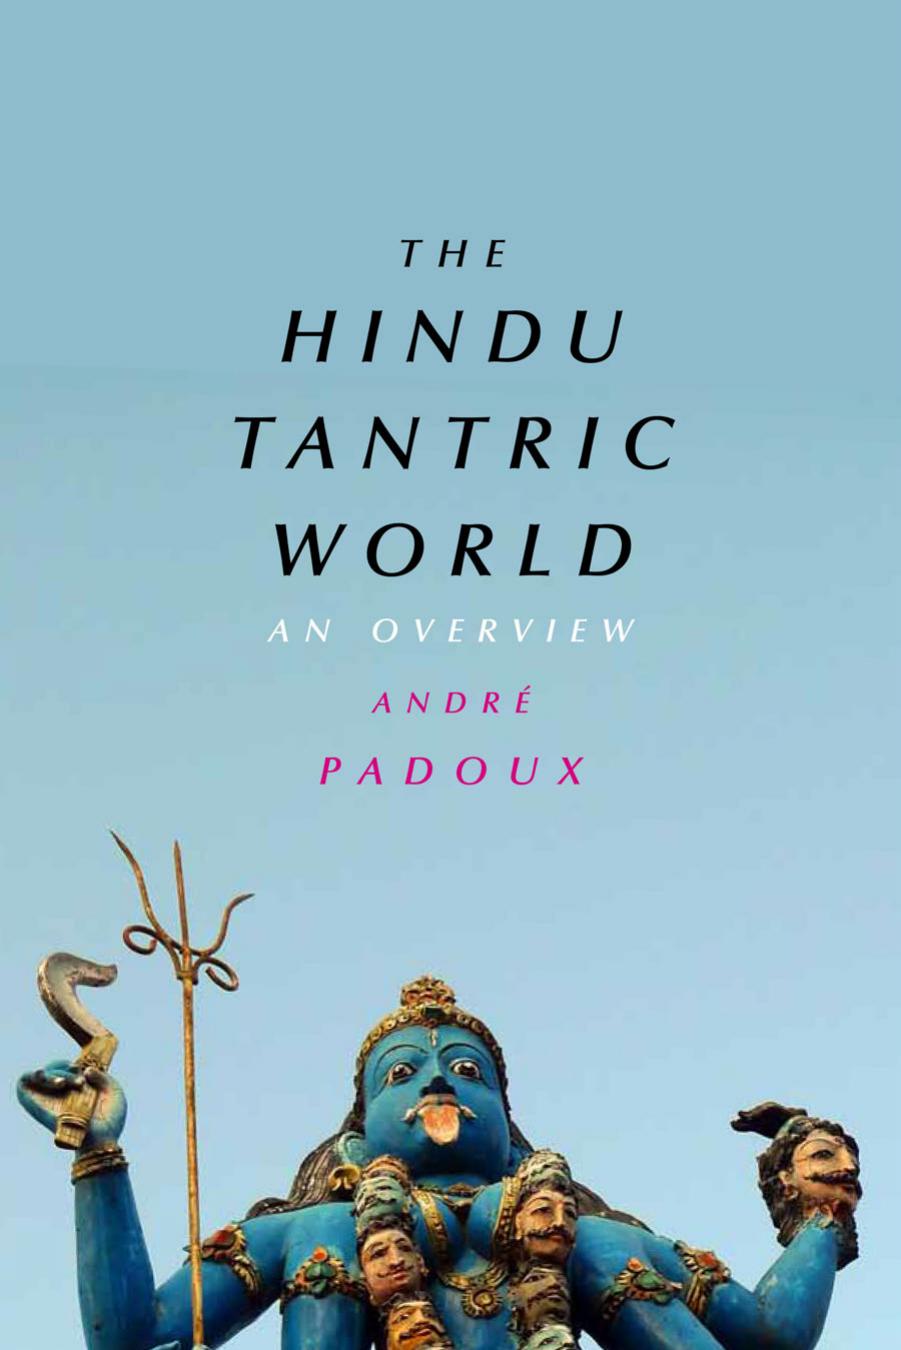 The Hindu Tantric World: An Overview by André Padoux